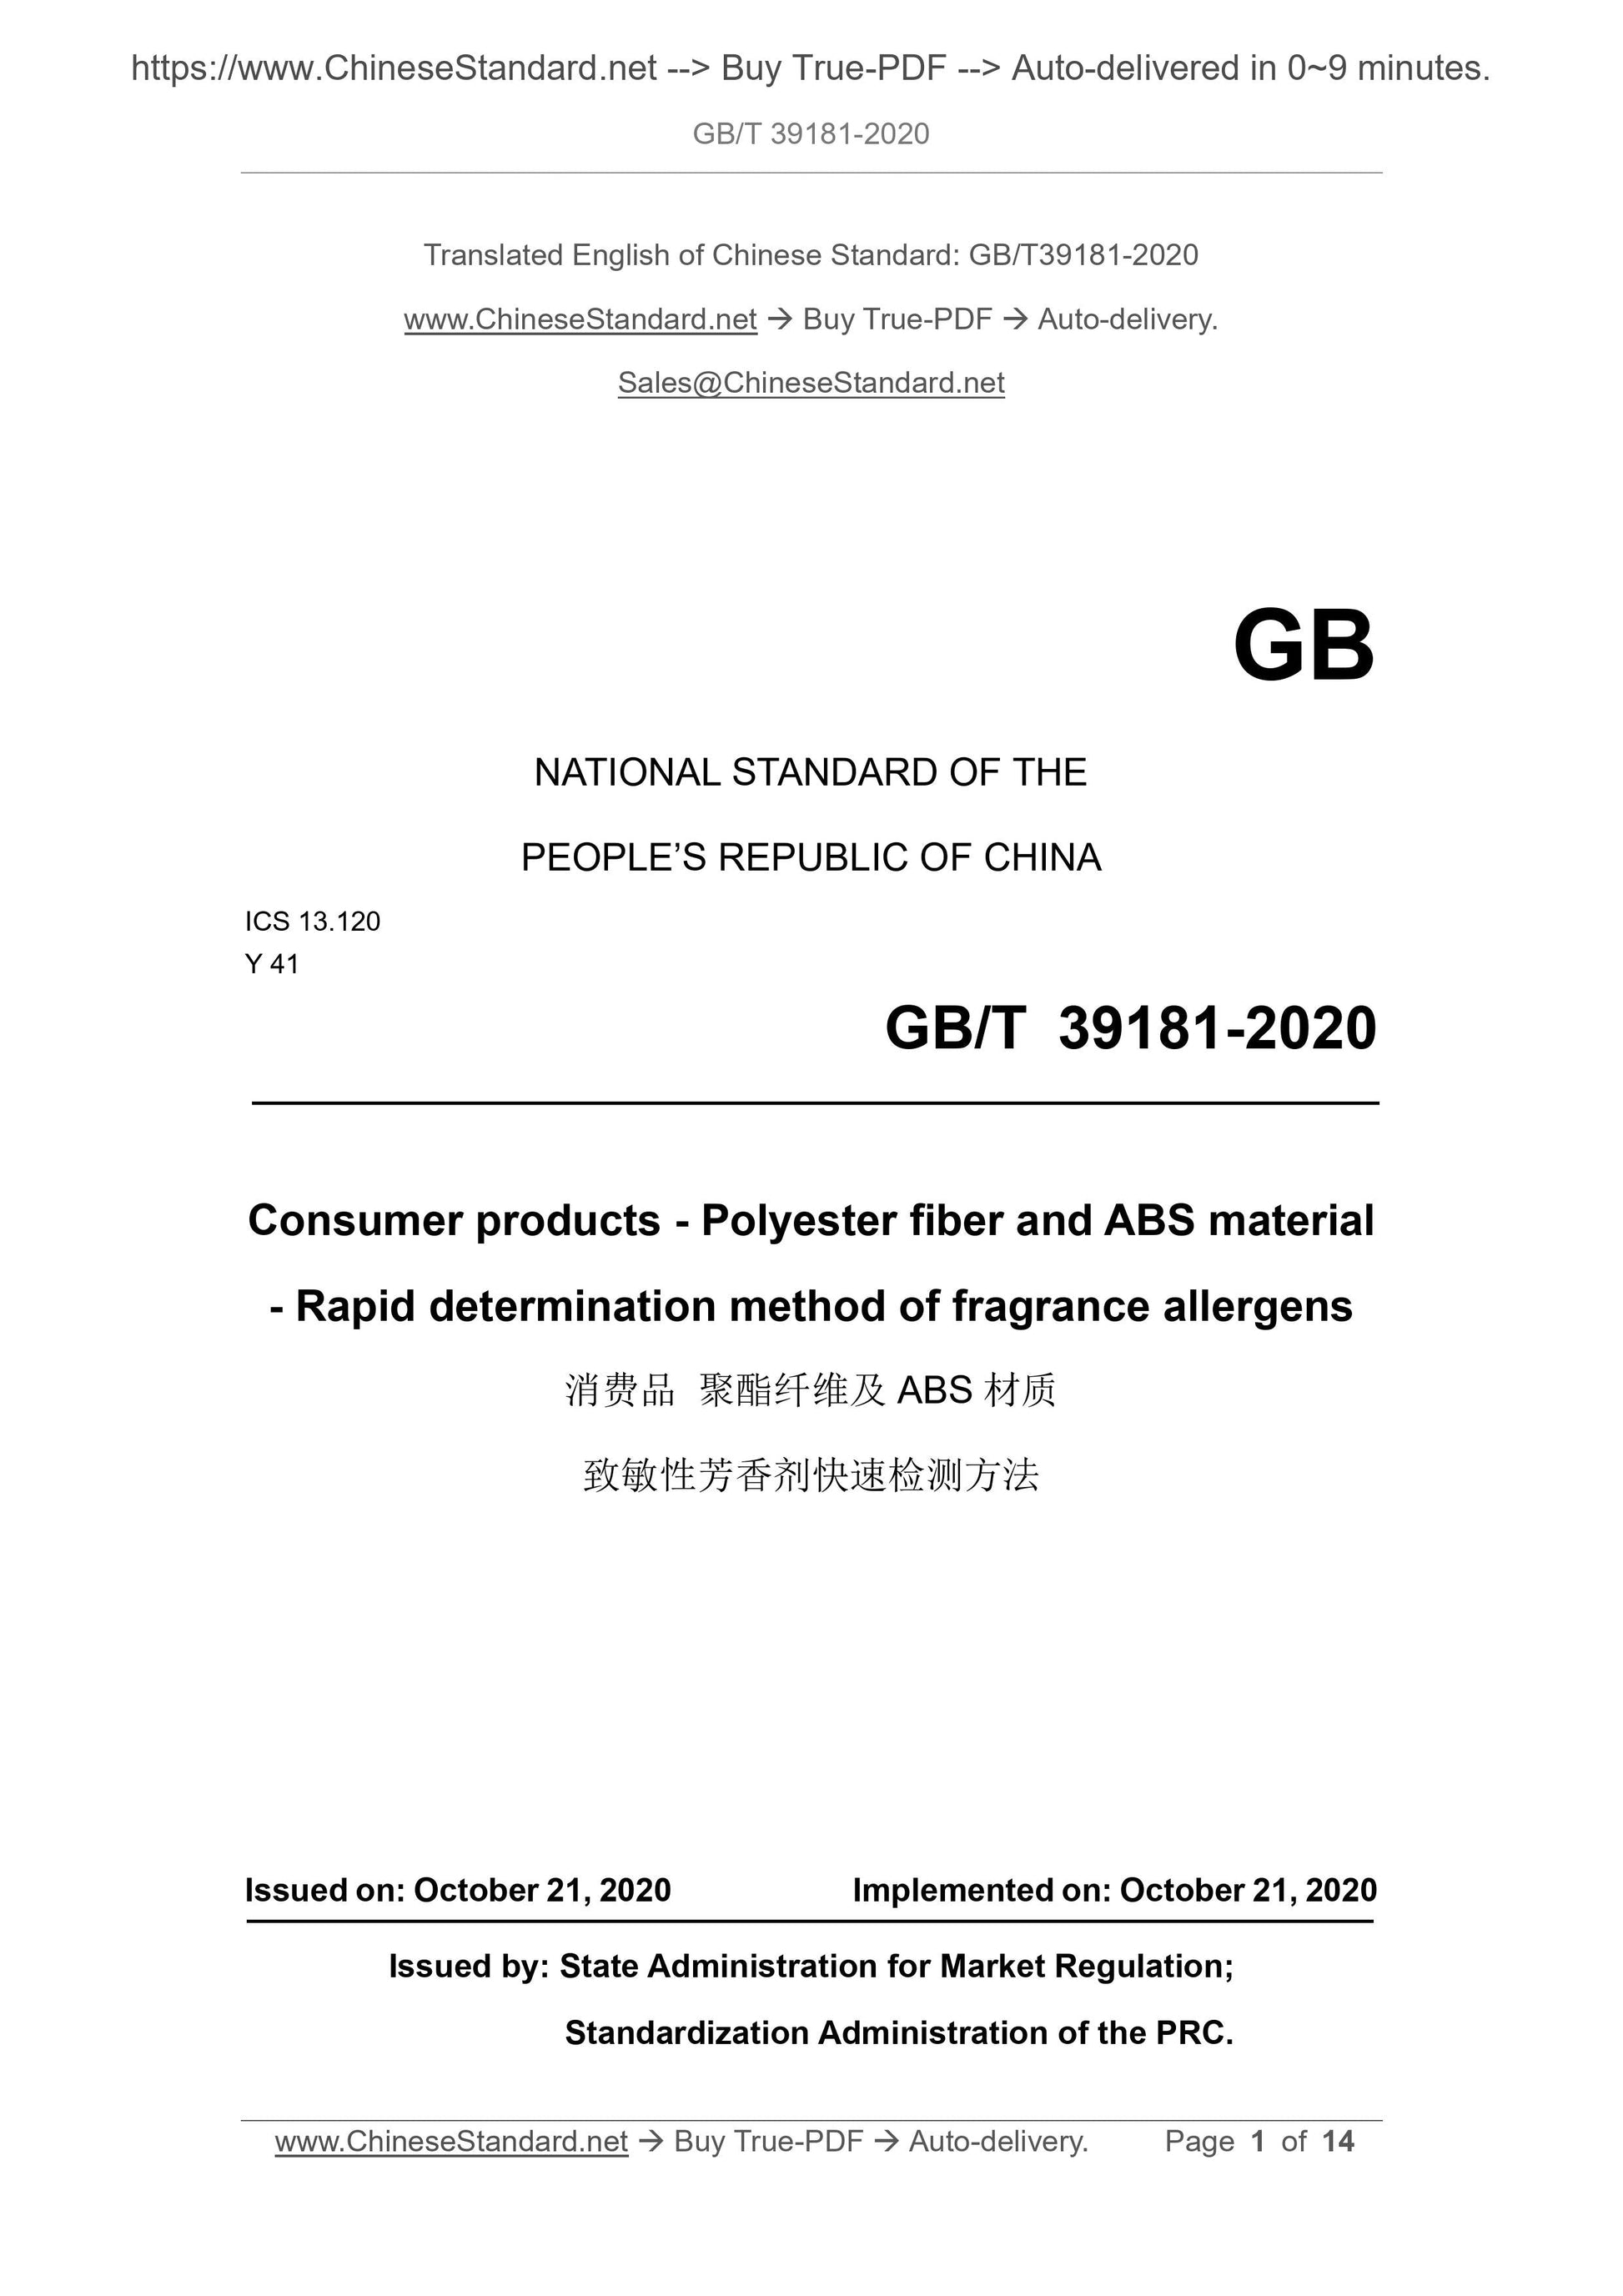 GB/T 39181-2020 Page 1